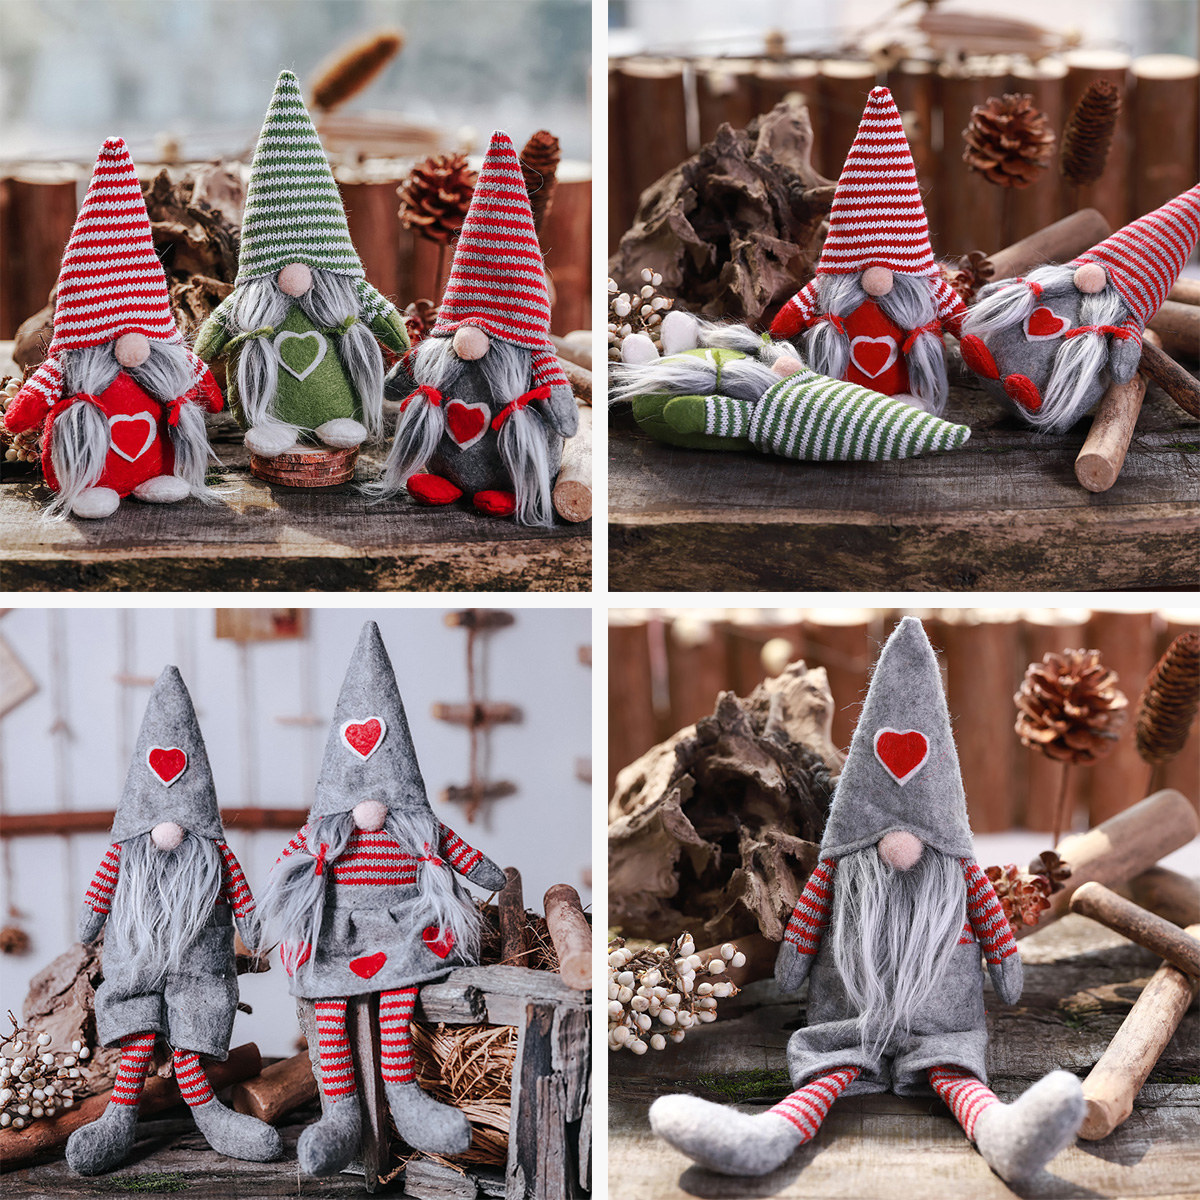 Non-Woven-Hat-With-Heart-Handmade-Gnome-Santa-Christmas-Figurines-Ornament-Holiday-Table-Decorations-1634099-2